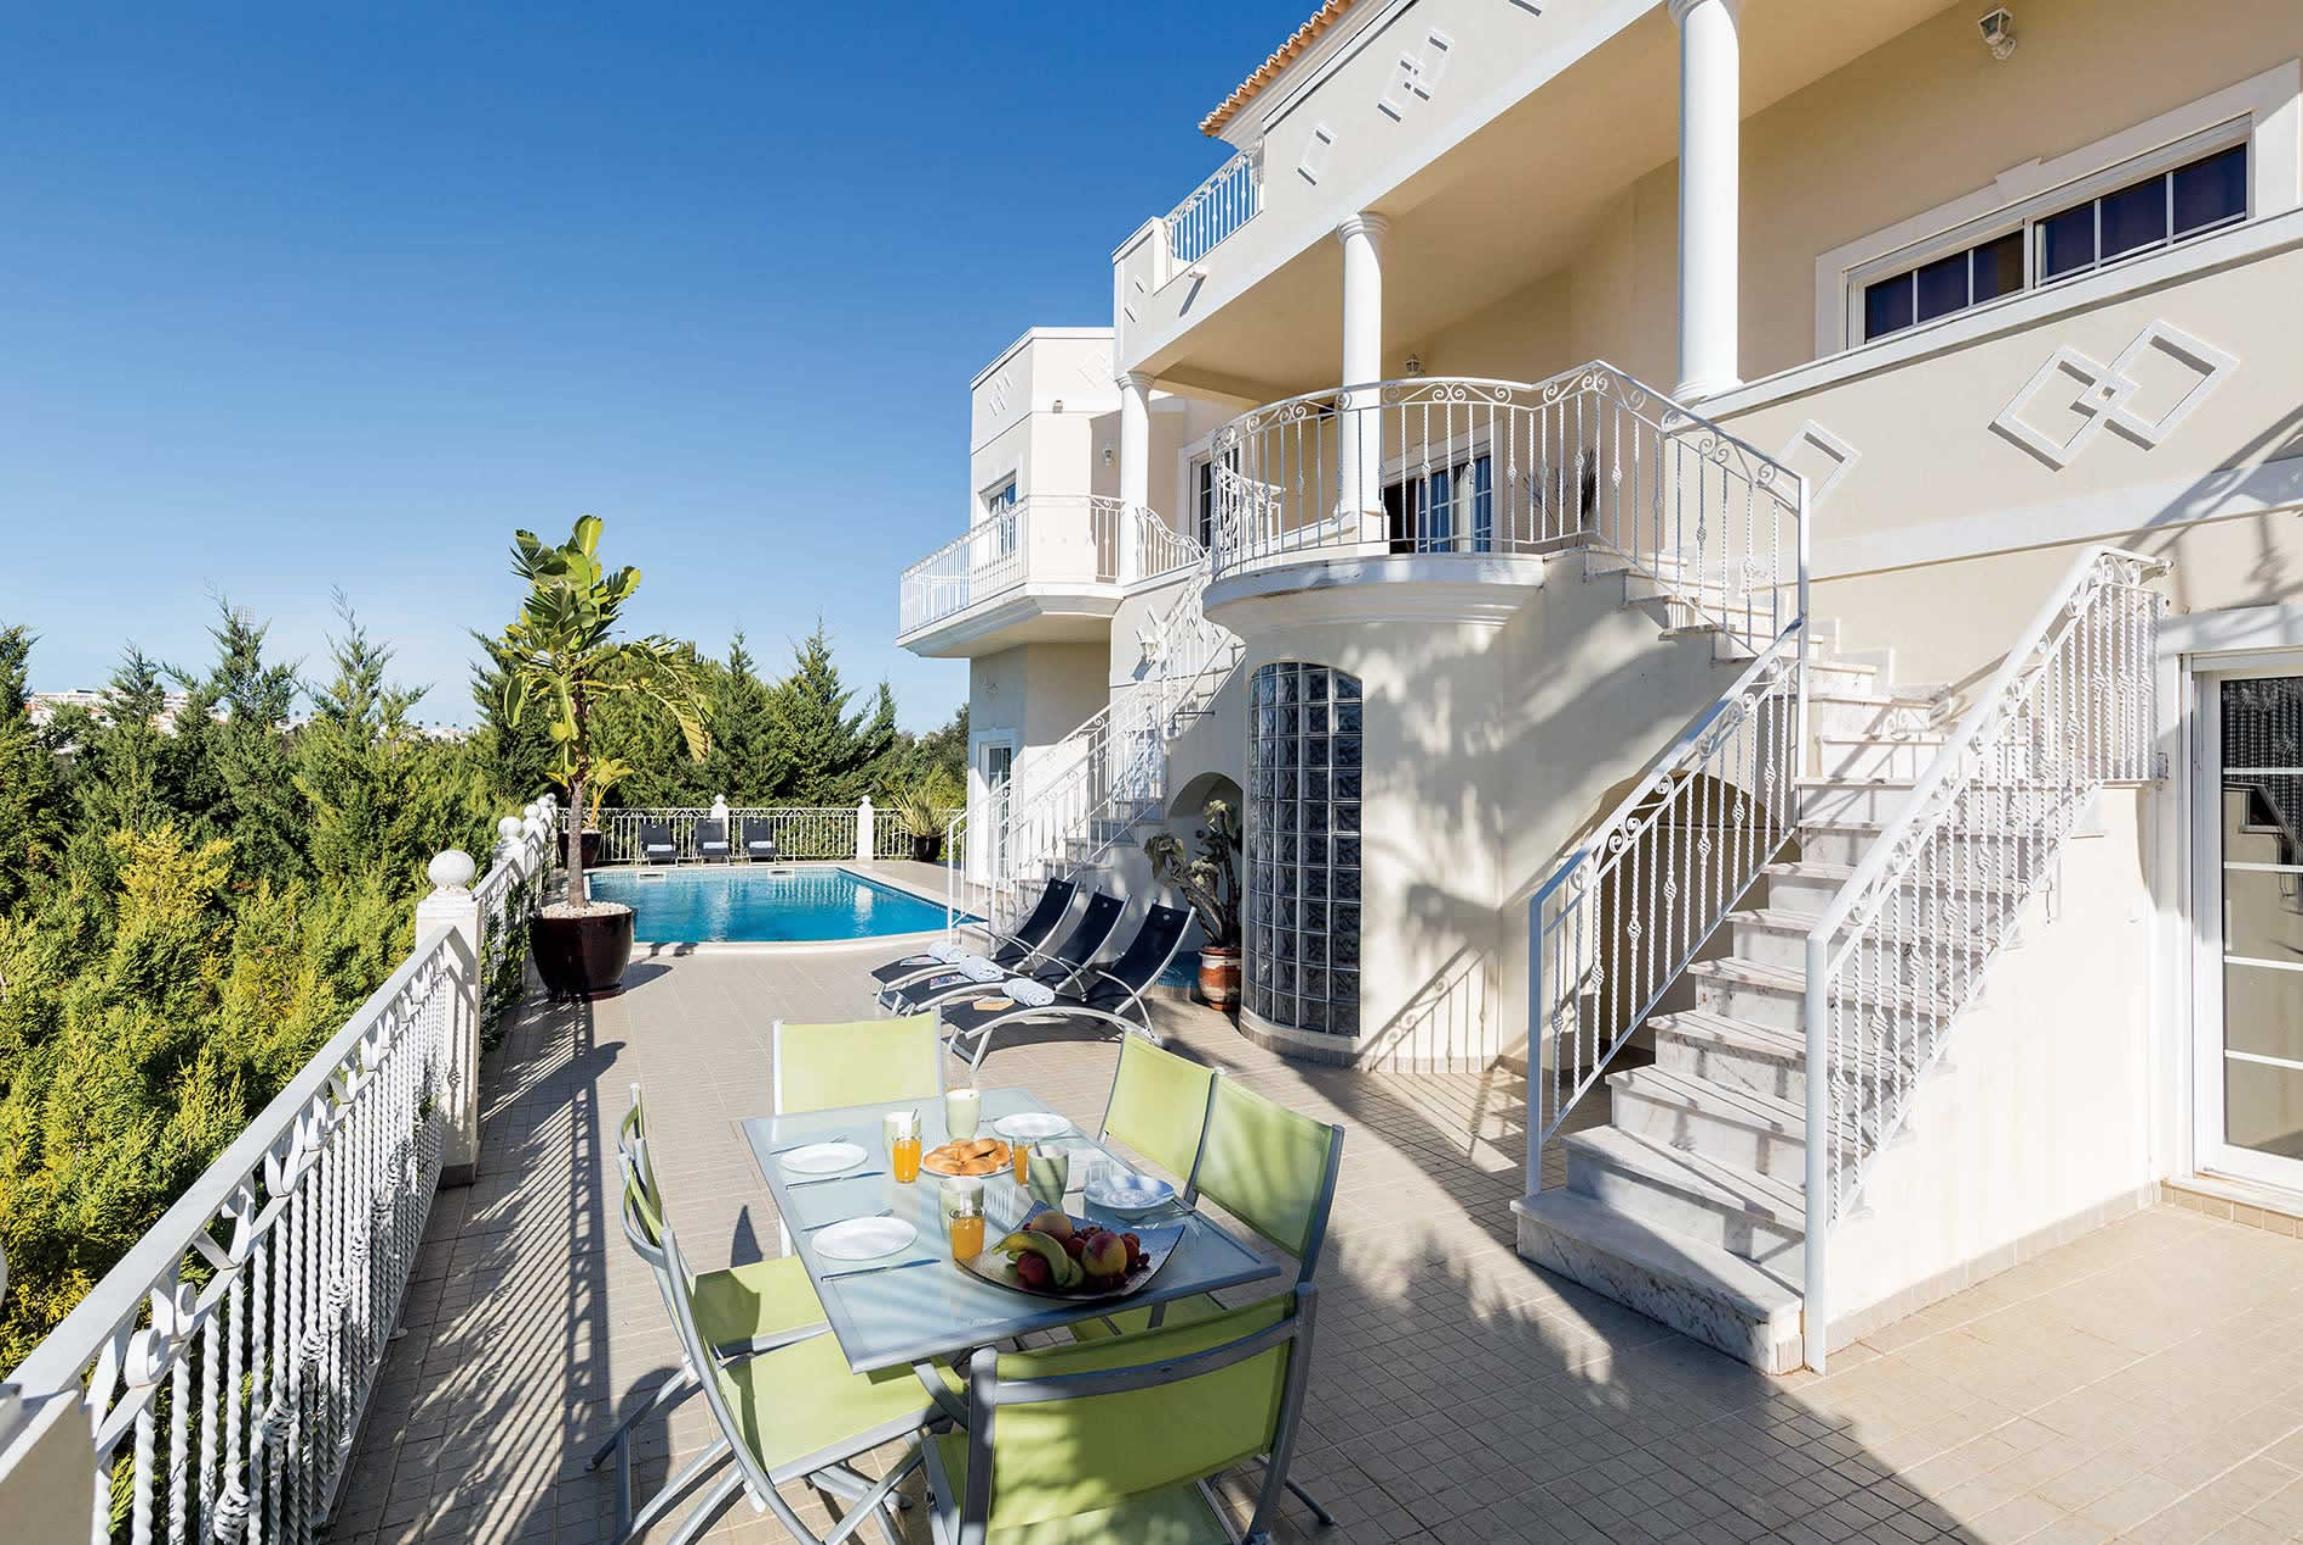 Property Image 1 - Outstanding Chic Villa with Picturesque Spacious Pool
